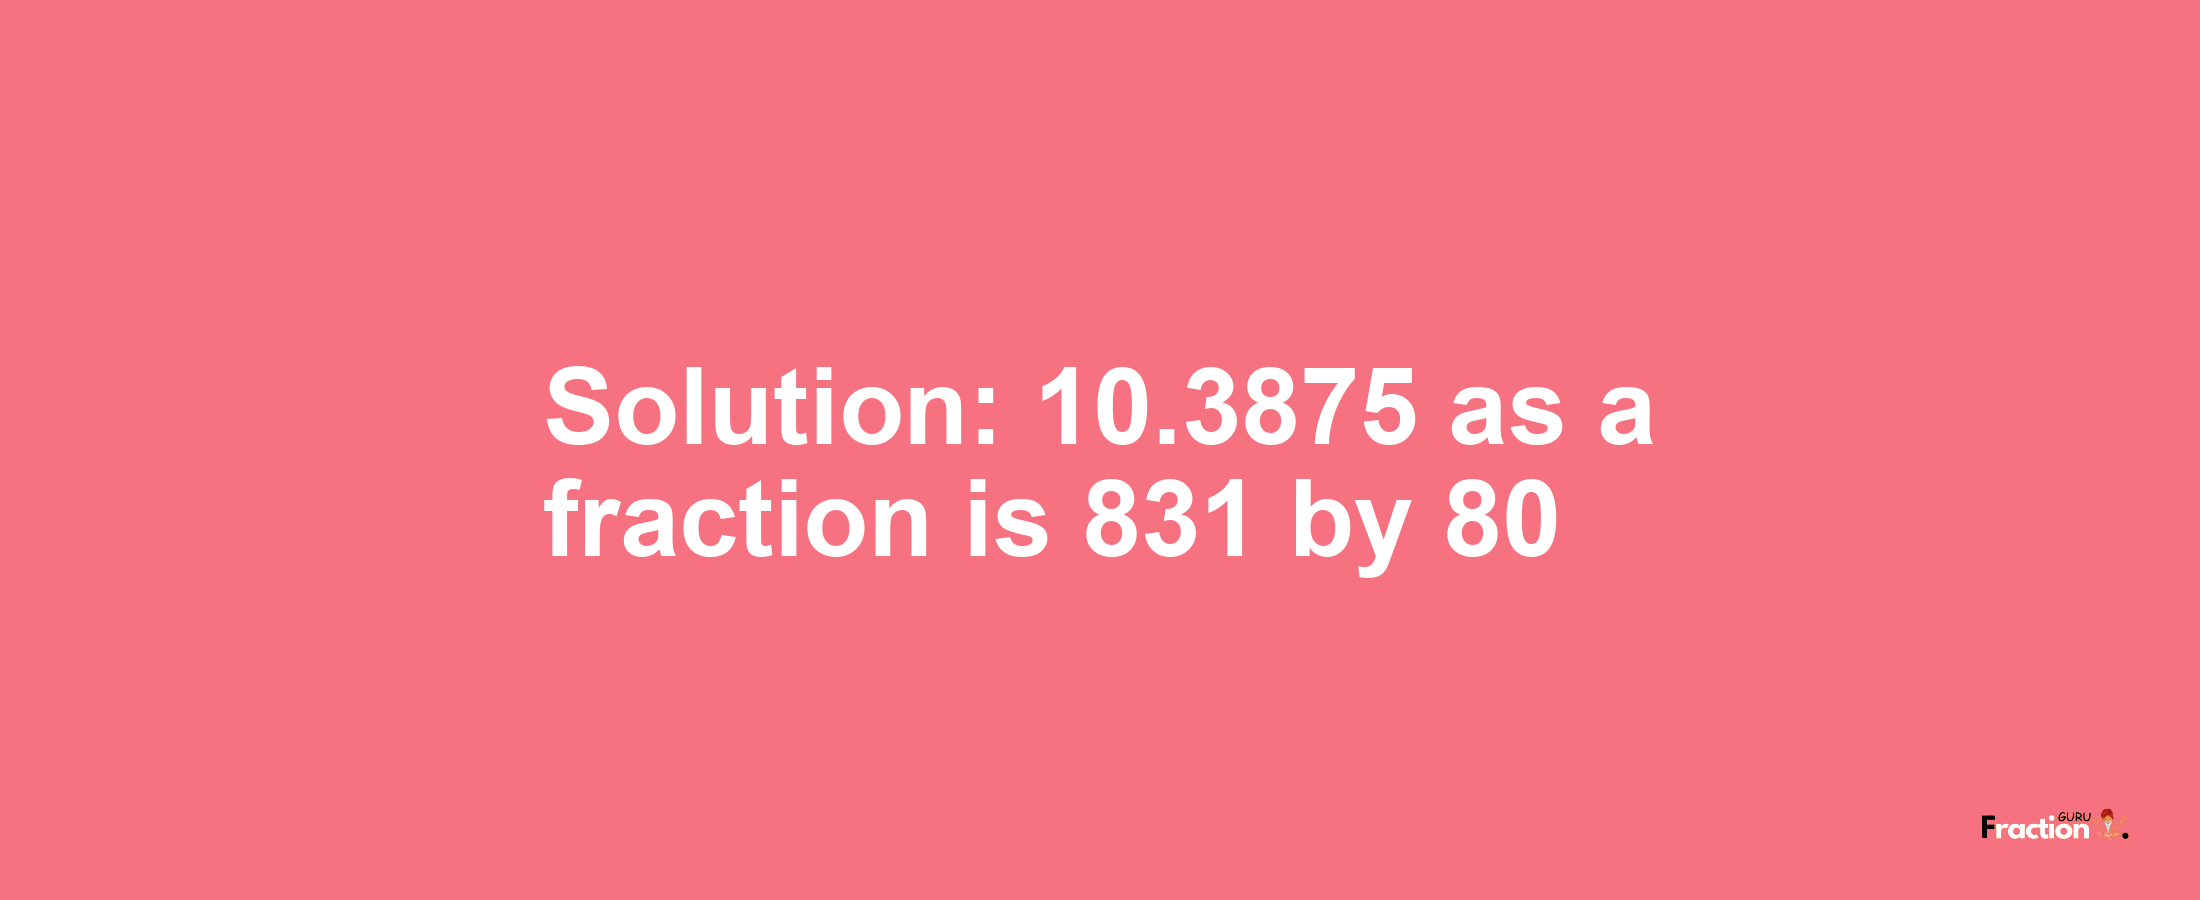 Solution:10.3875 as a fraction is 831/80